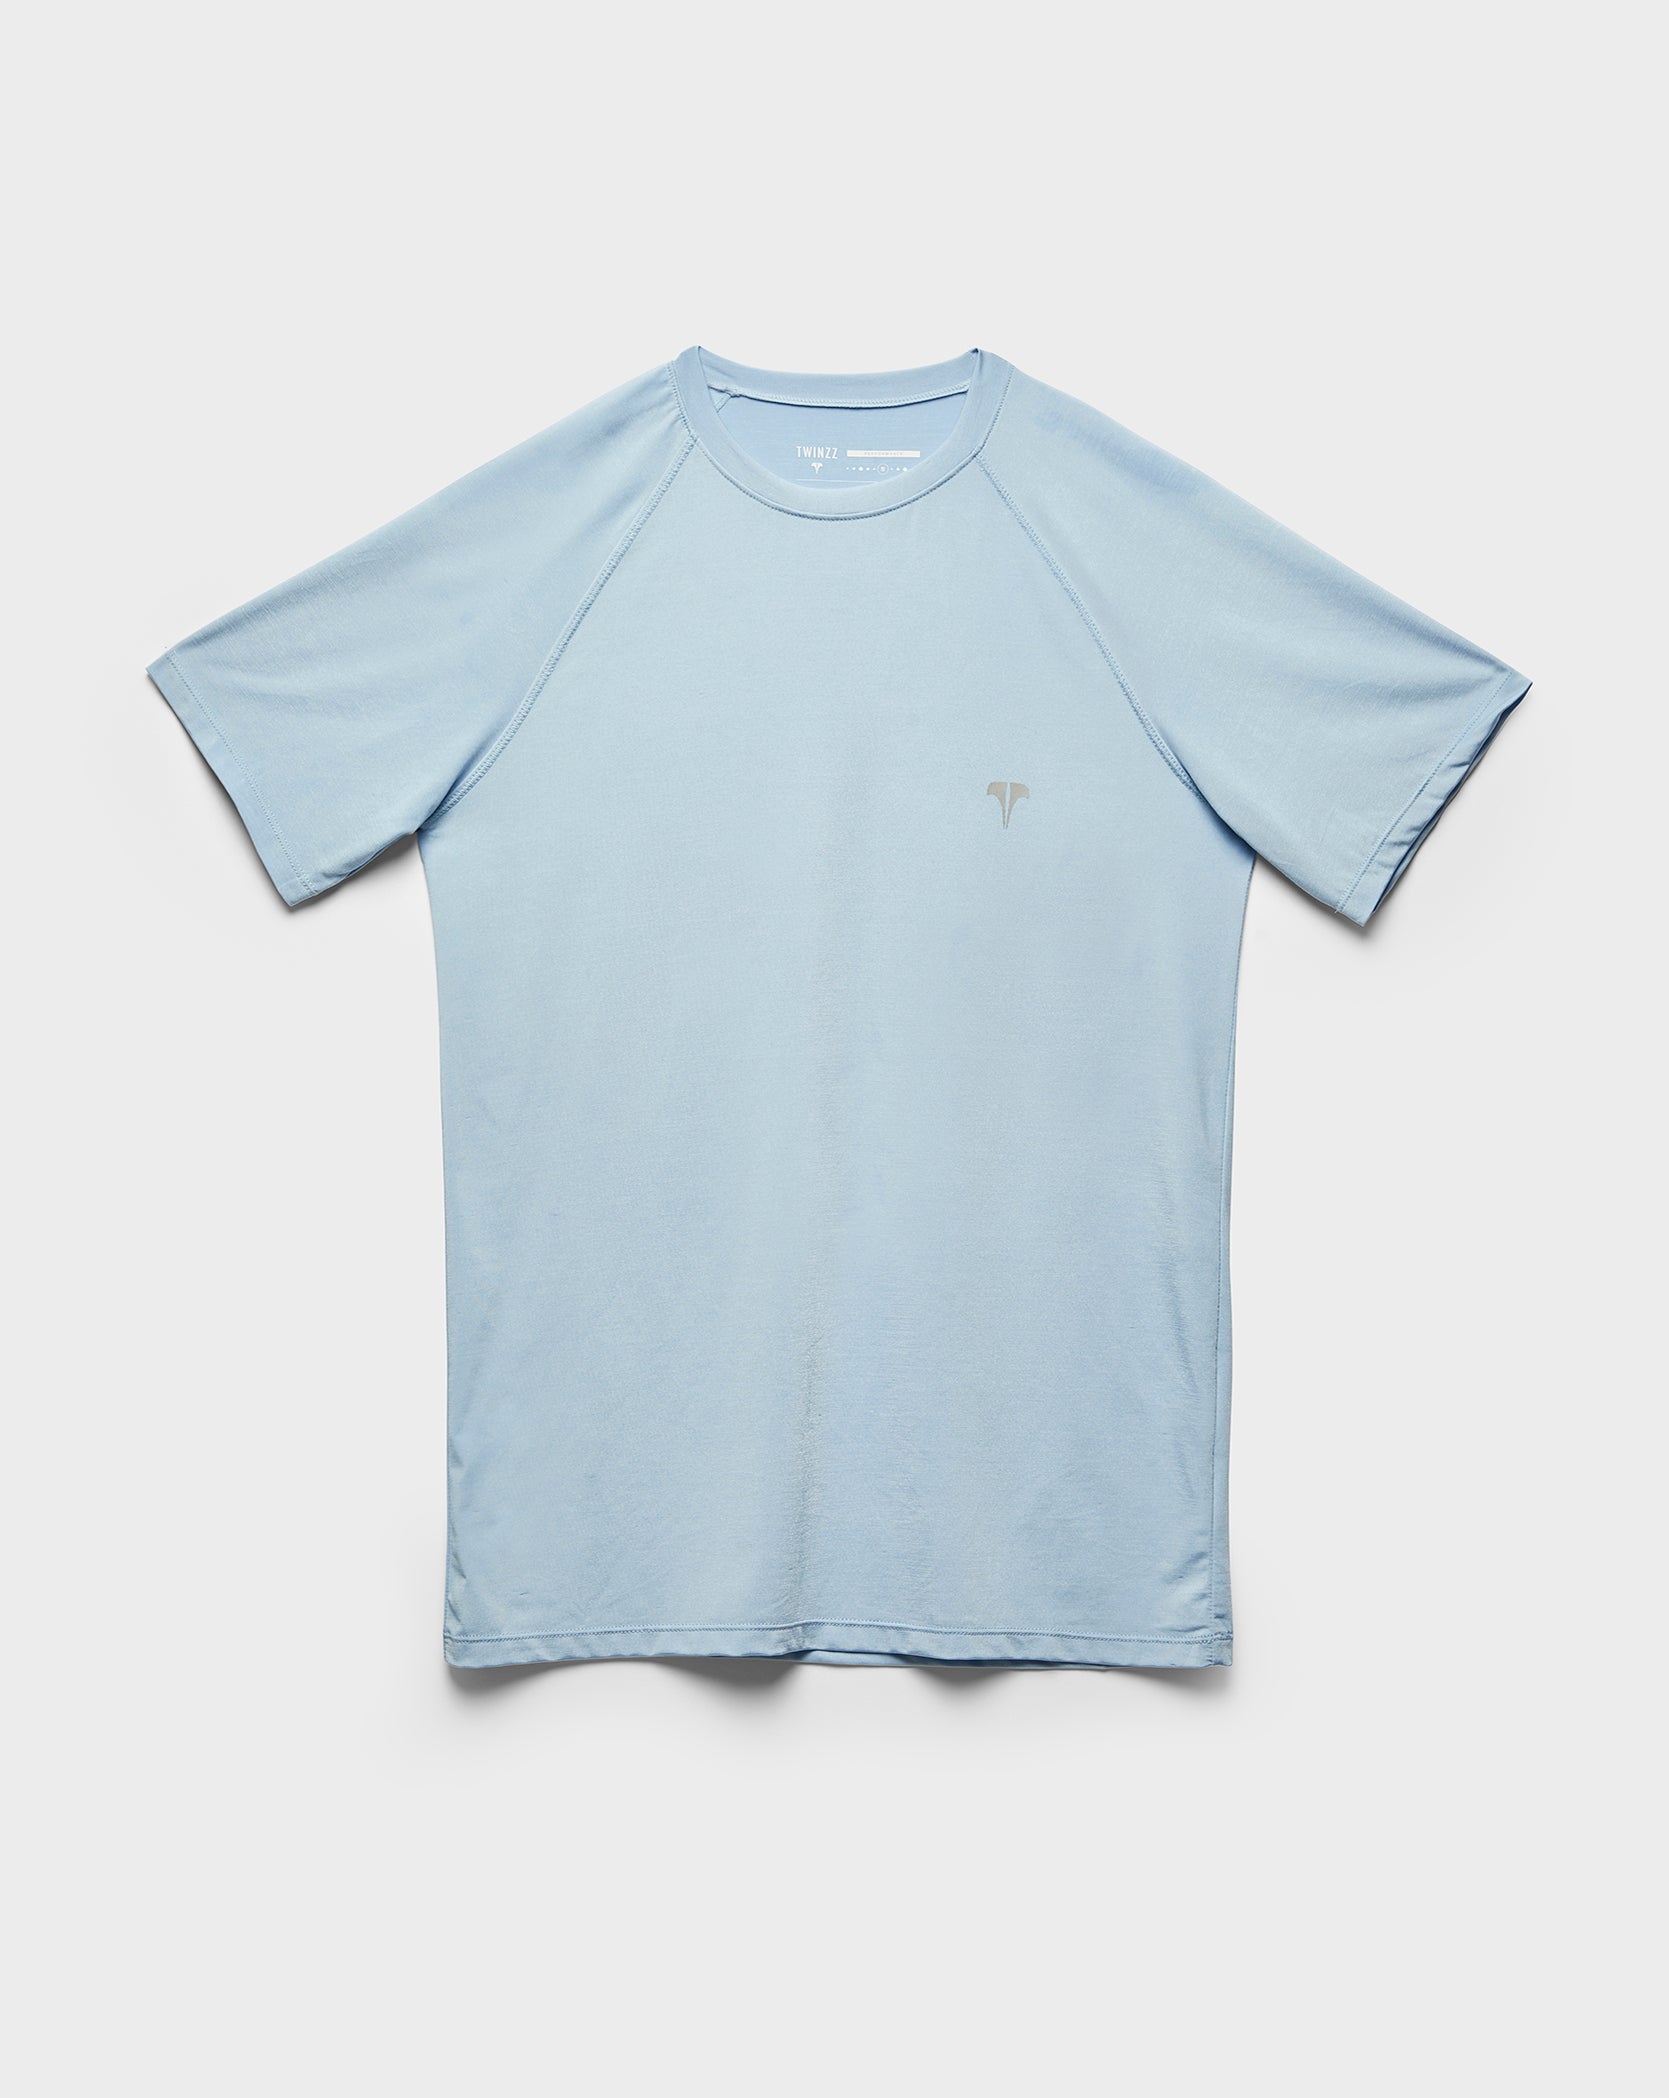 Twinzz active sky blue t-shirt front